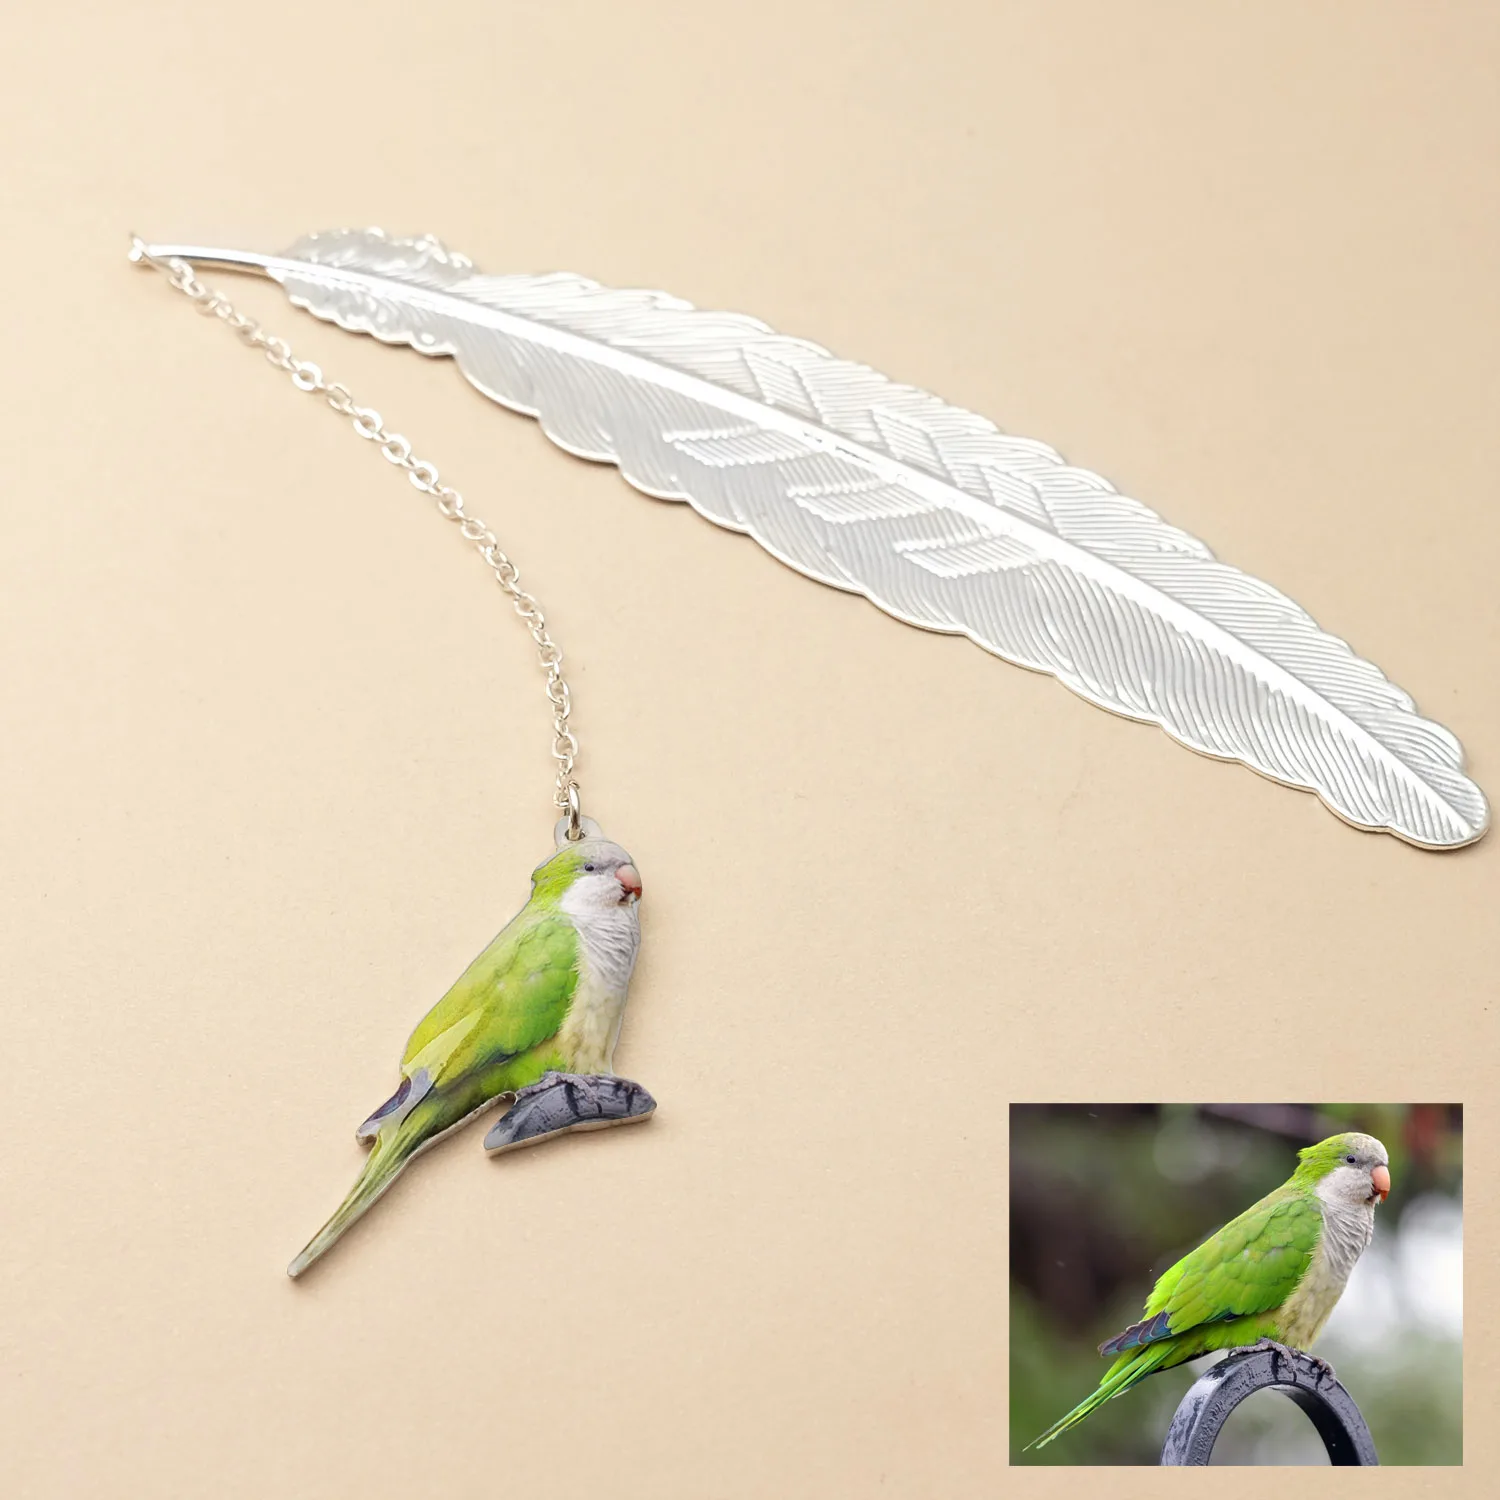 Personalized Photo Bookmark Animal Picture Pendant Feather Shaped Metal Bookmarks For Books Memento Birthday Gift Christmas Gift custom metal bookmark parrot bookmark pagination mark book clip personalized any animal photo bookmarks for her gift for reader